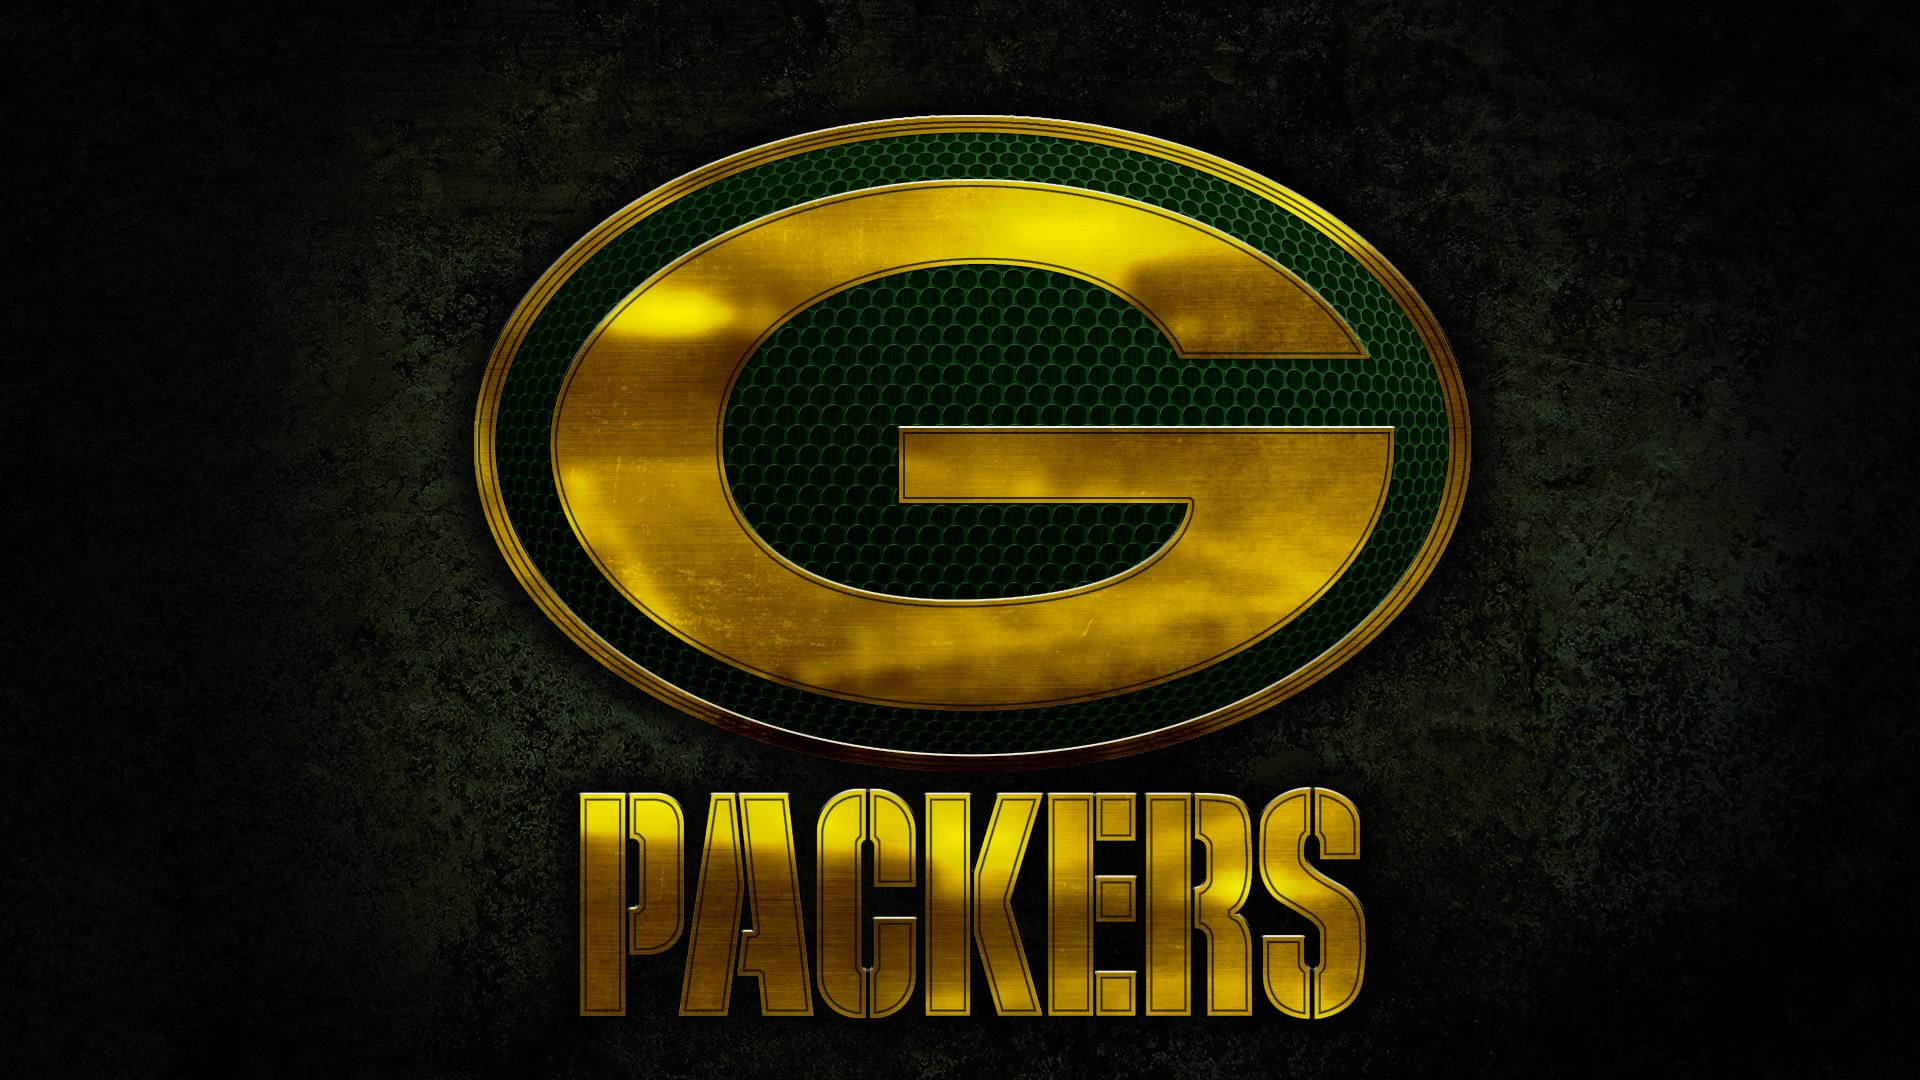 What are your Packers wallpapers? : GreenBayPackers